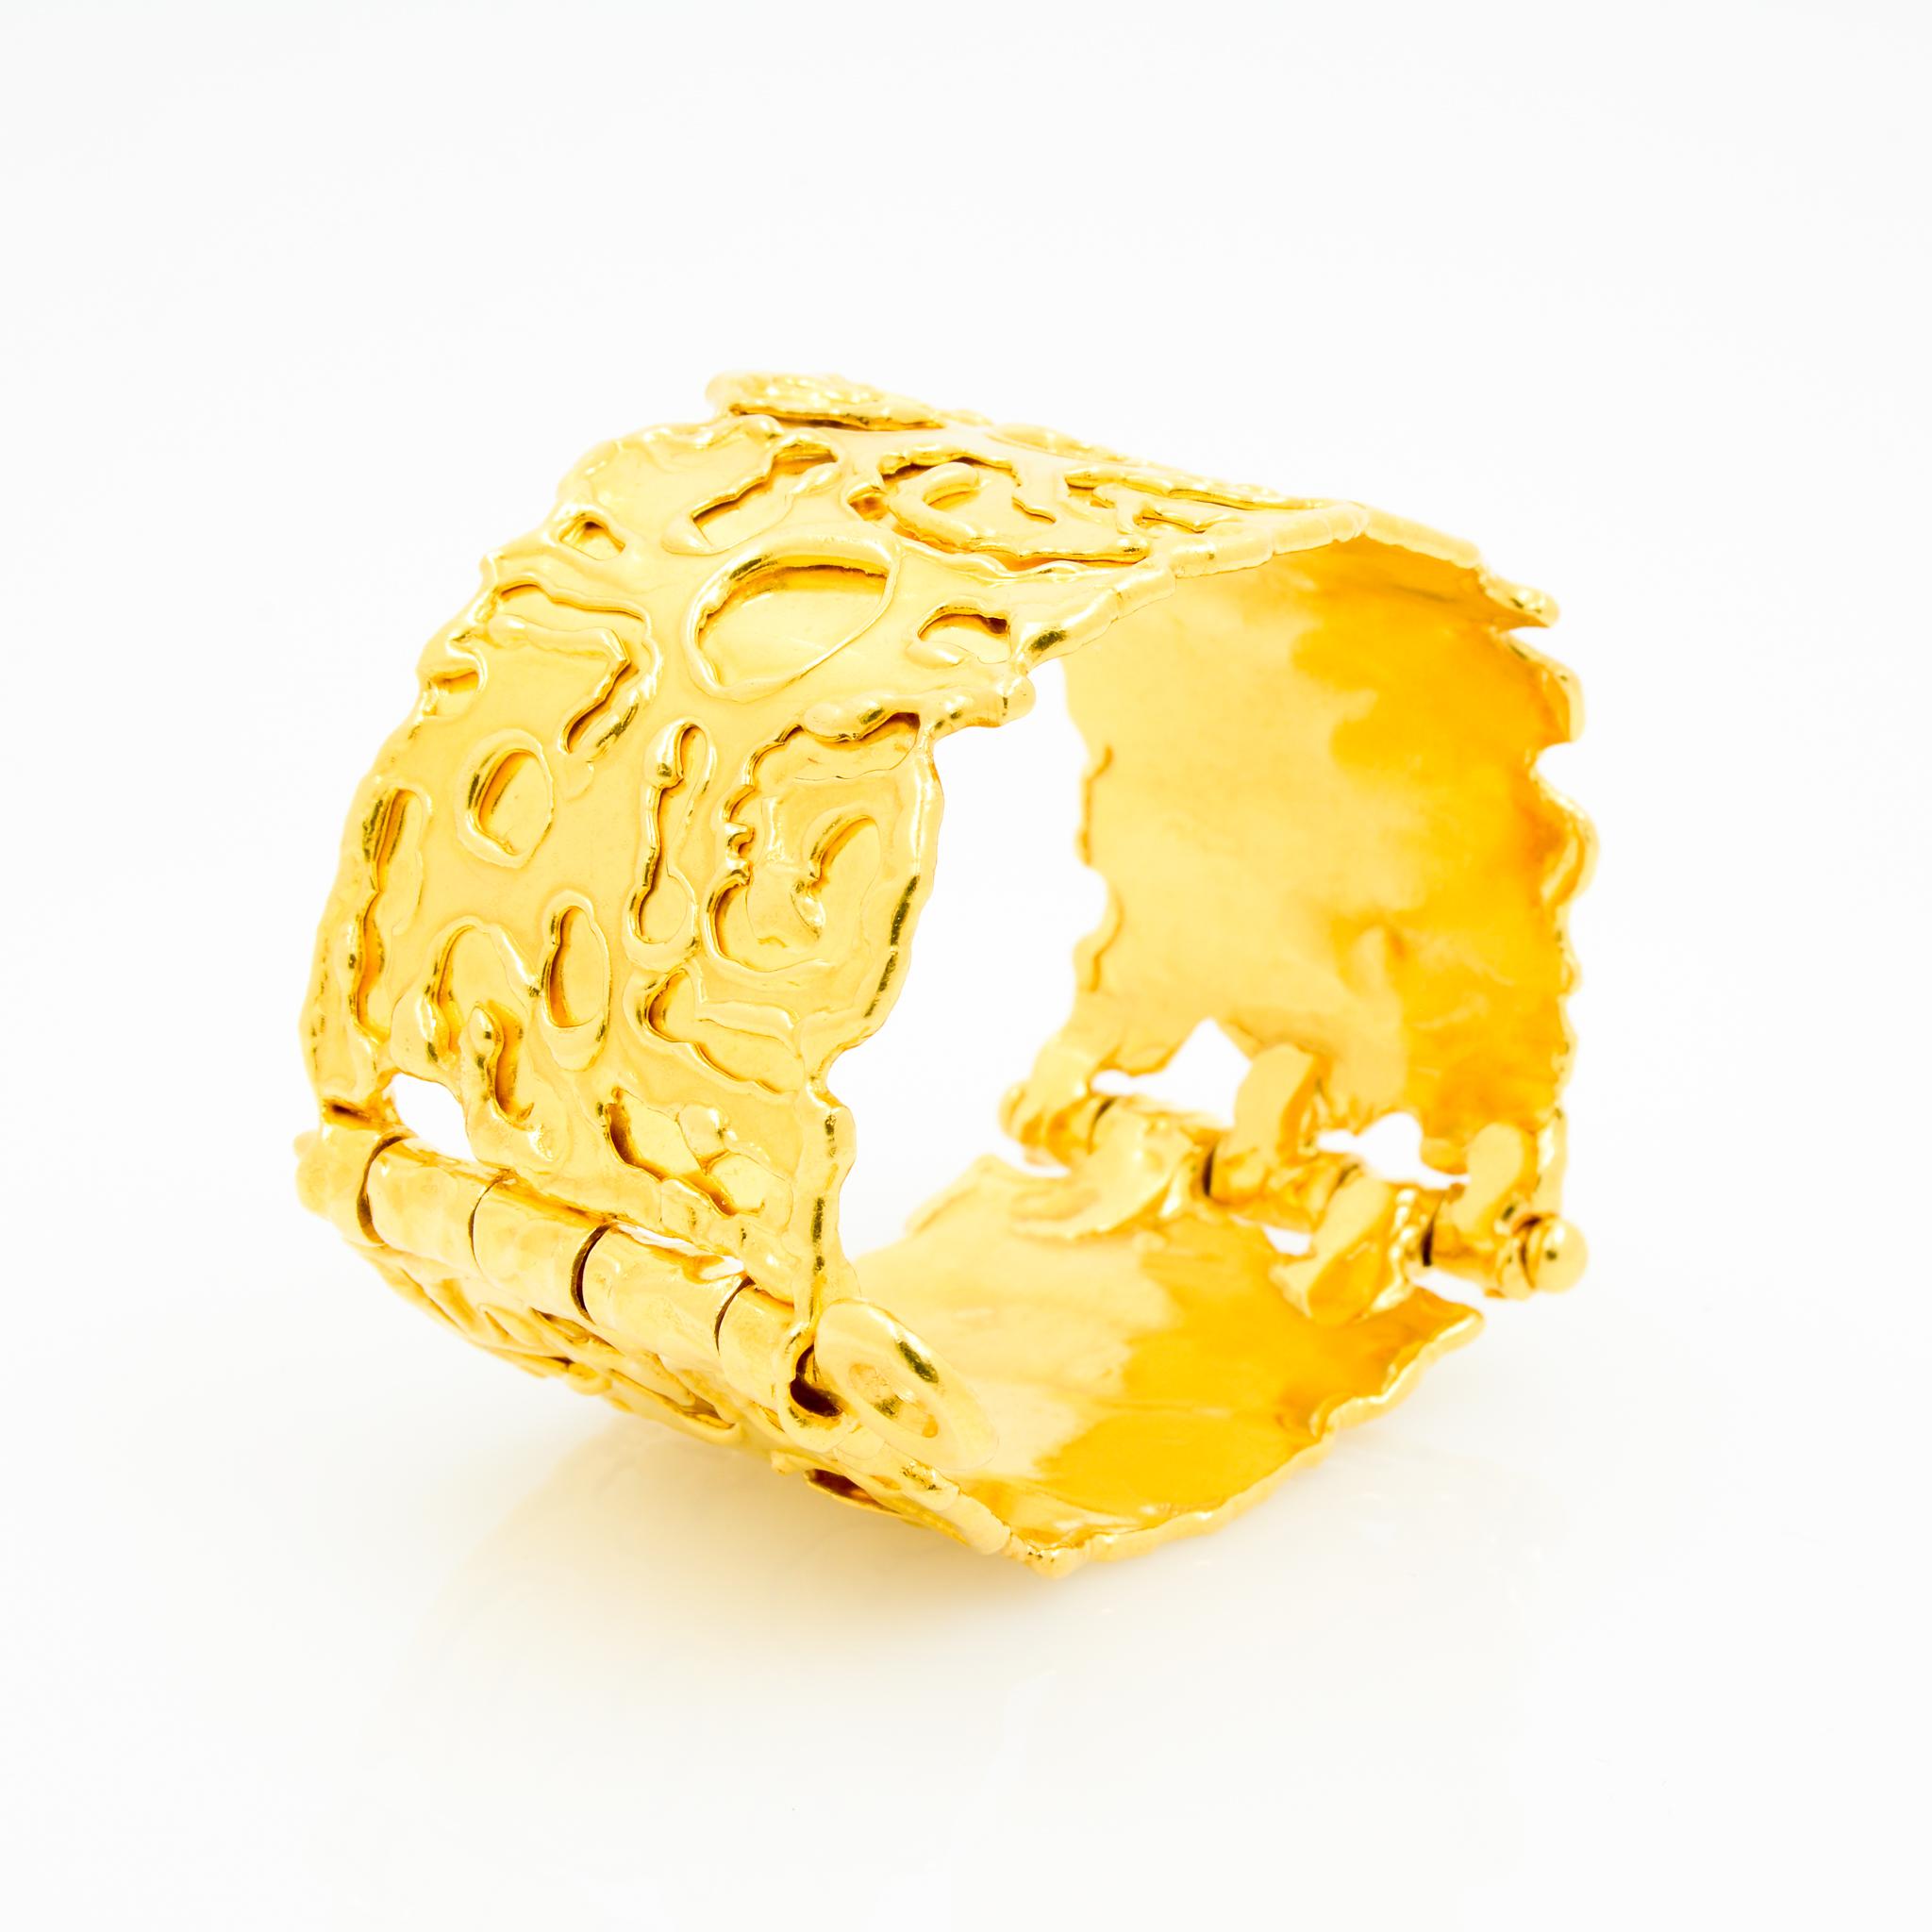 By designer Jean Mahie, this pin clasp hinged bangle is crafted from 22 karat yellow gold, with Mahie's signature primitive organic designs adorning the surface. This limited edition cuff bracelet is on of the widest versions of this style measuring